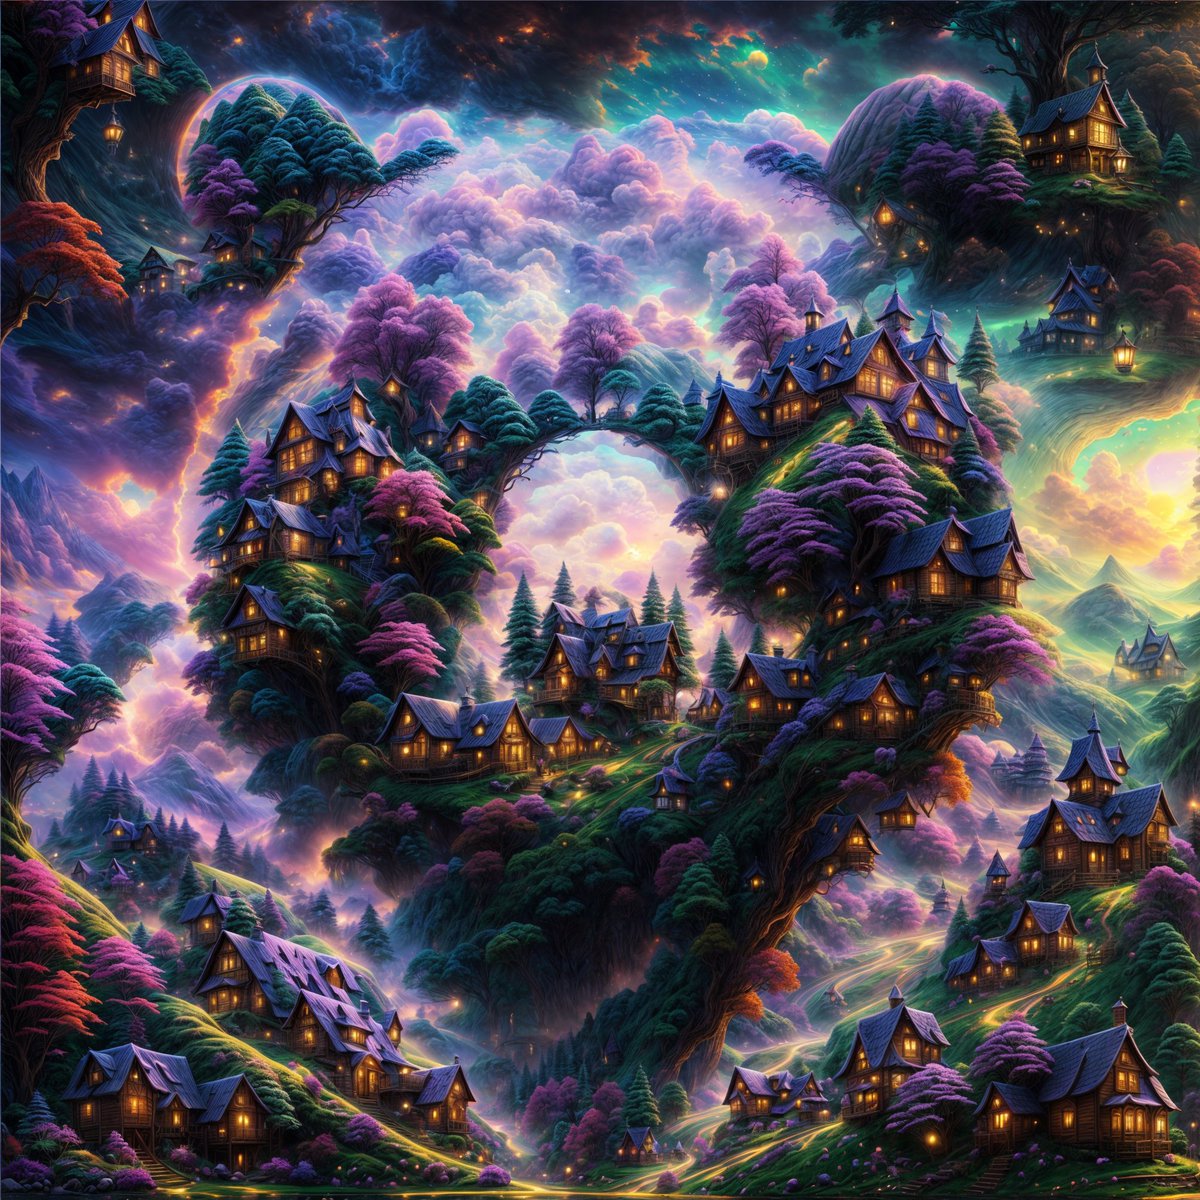 gm everyone Another of my #BBNFT #AIart Alpha Pass that looks absolutely amazing it's a magical blend of fantasy houses and lush forest scenery. Talk about unlocking a portal to artistic wonderland Have you sent your @bearandbullnft to Eternity Lets see em in the comments 👀